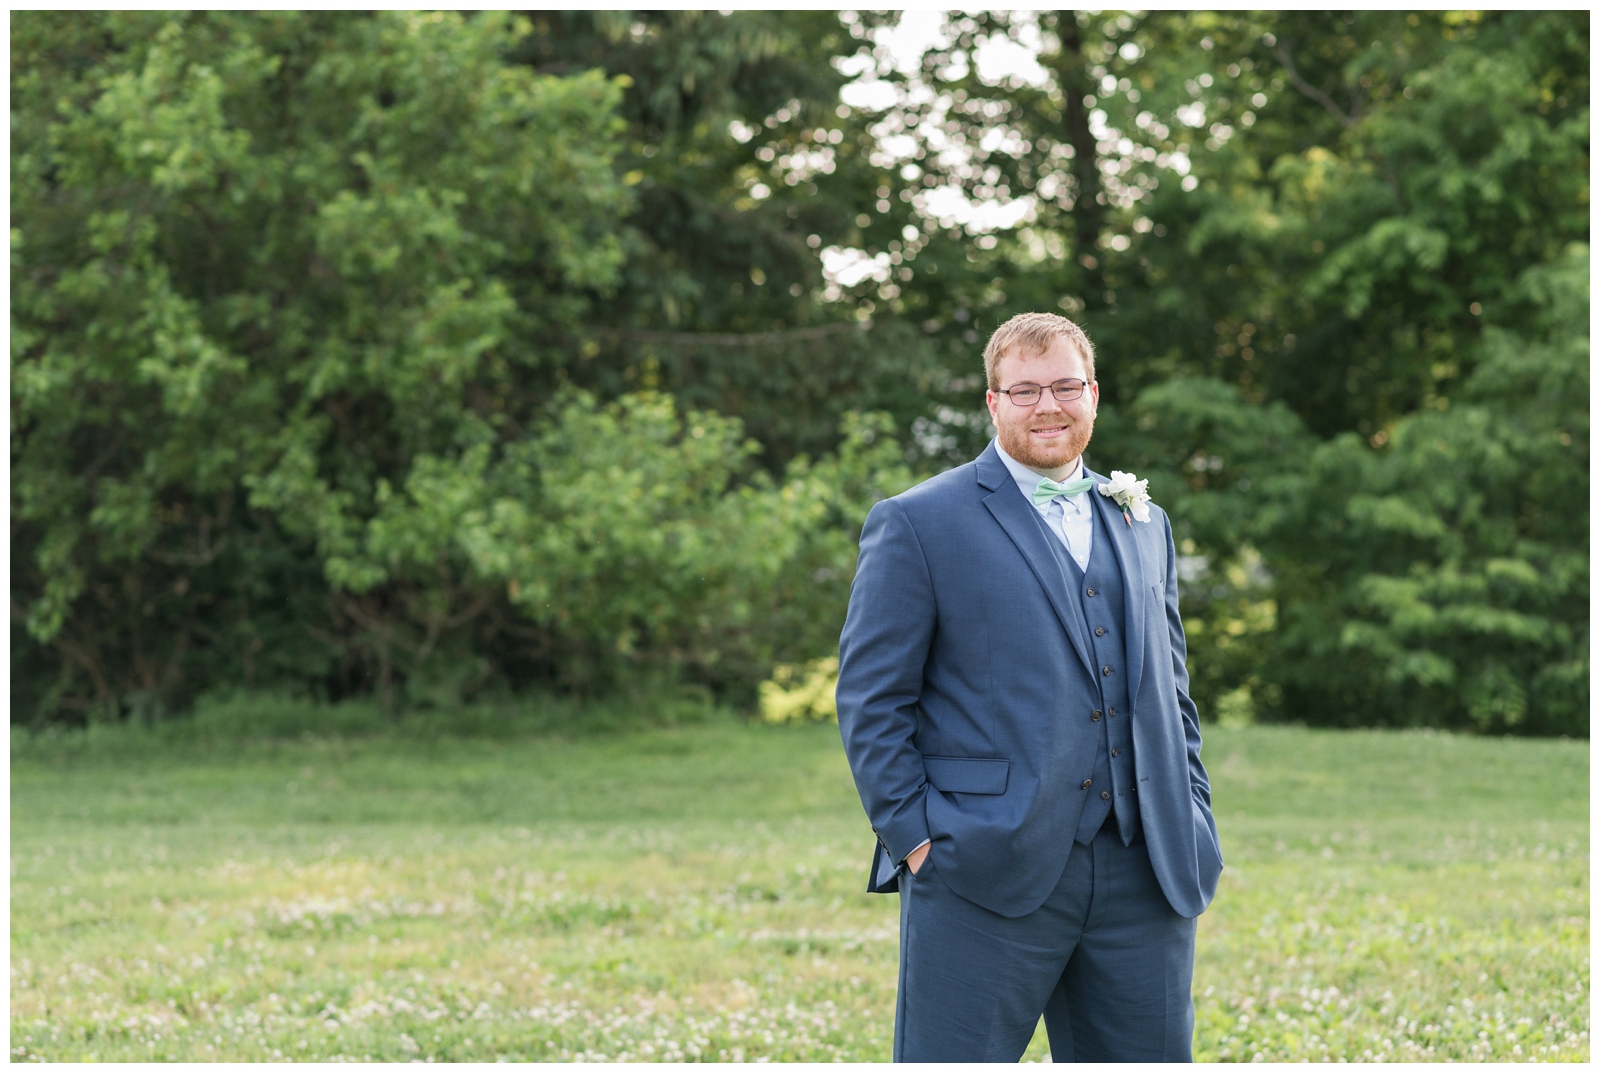 groom in navy suit with mint tie stands with his hands in pockets on OH golf course